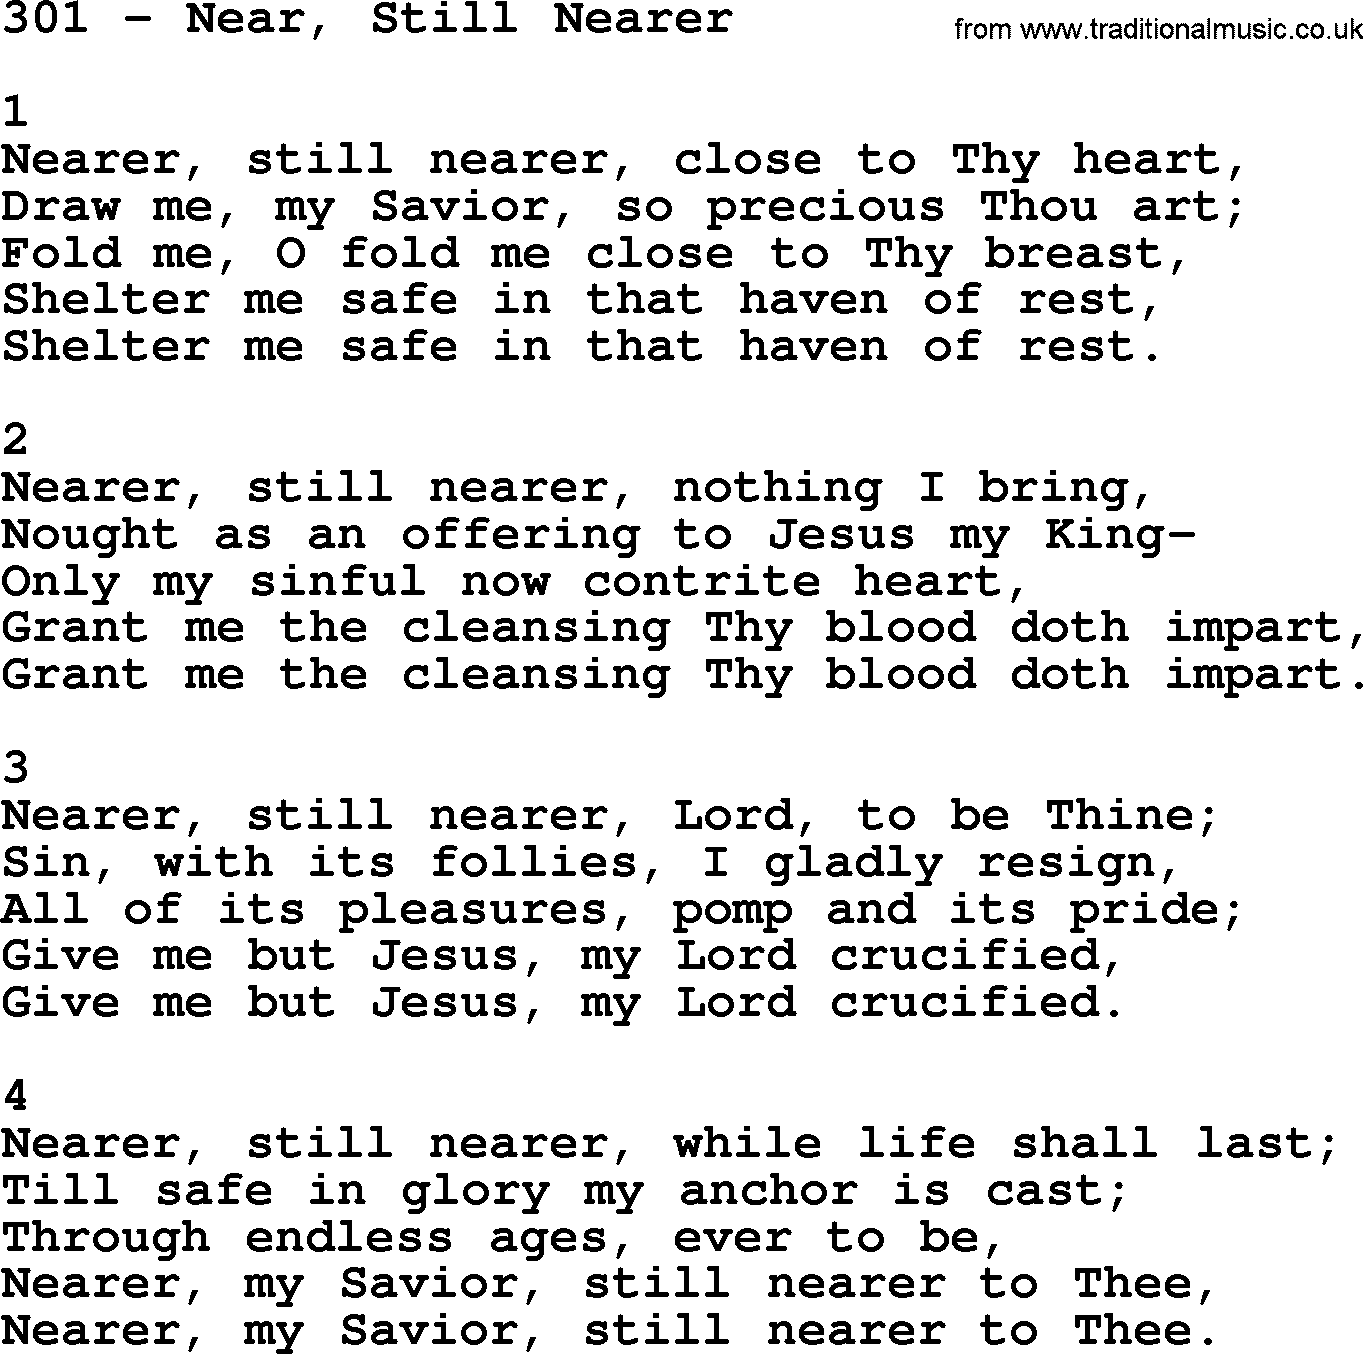 Complete Adventis Hymnal, title: 301-Near, Still Nearer, with lyrics, midi, mp3, powerpoints(PPT) and PDF,